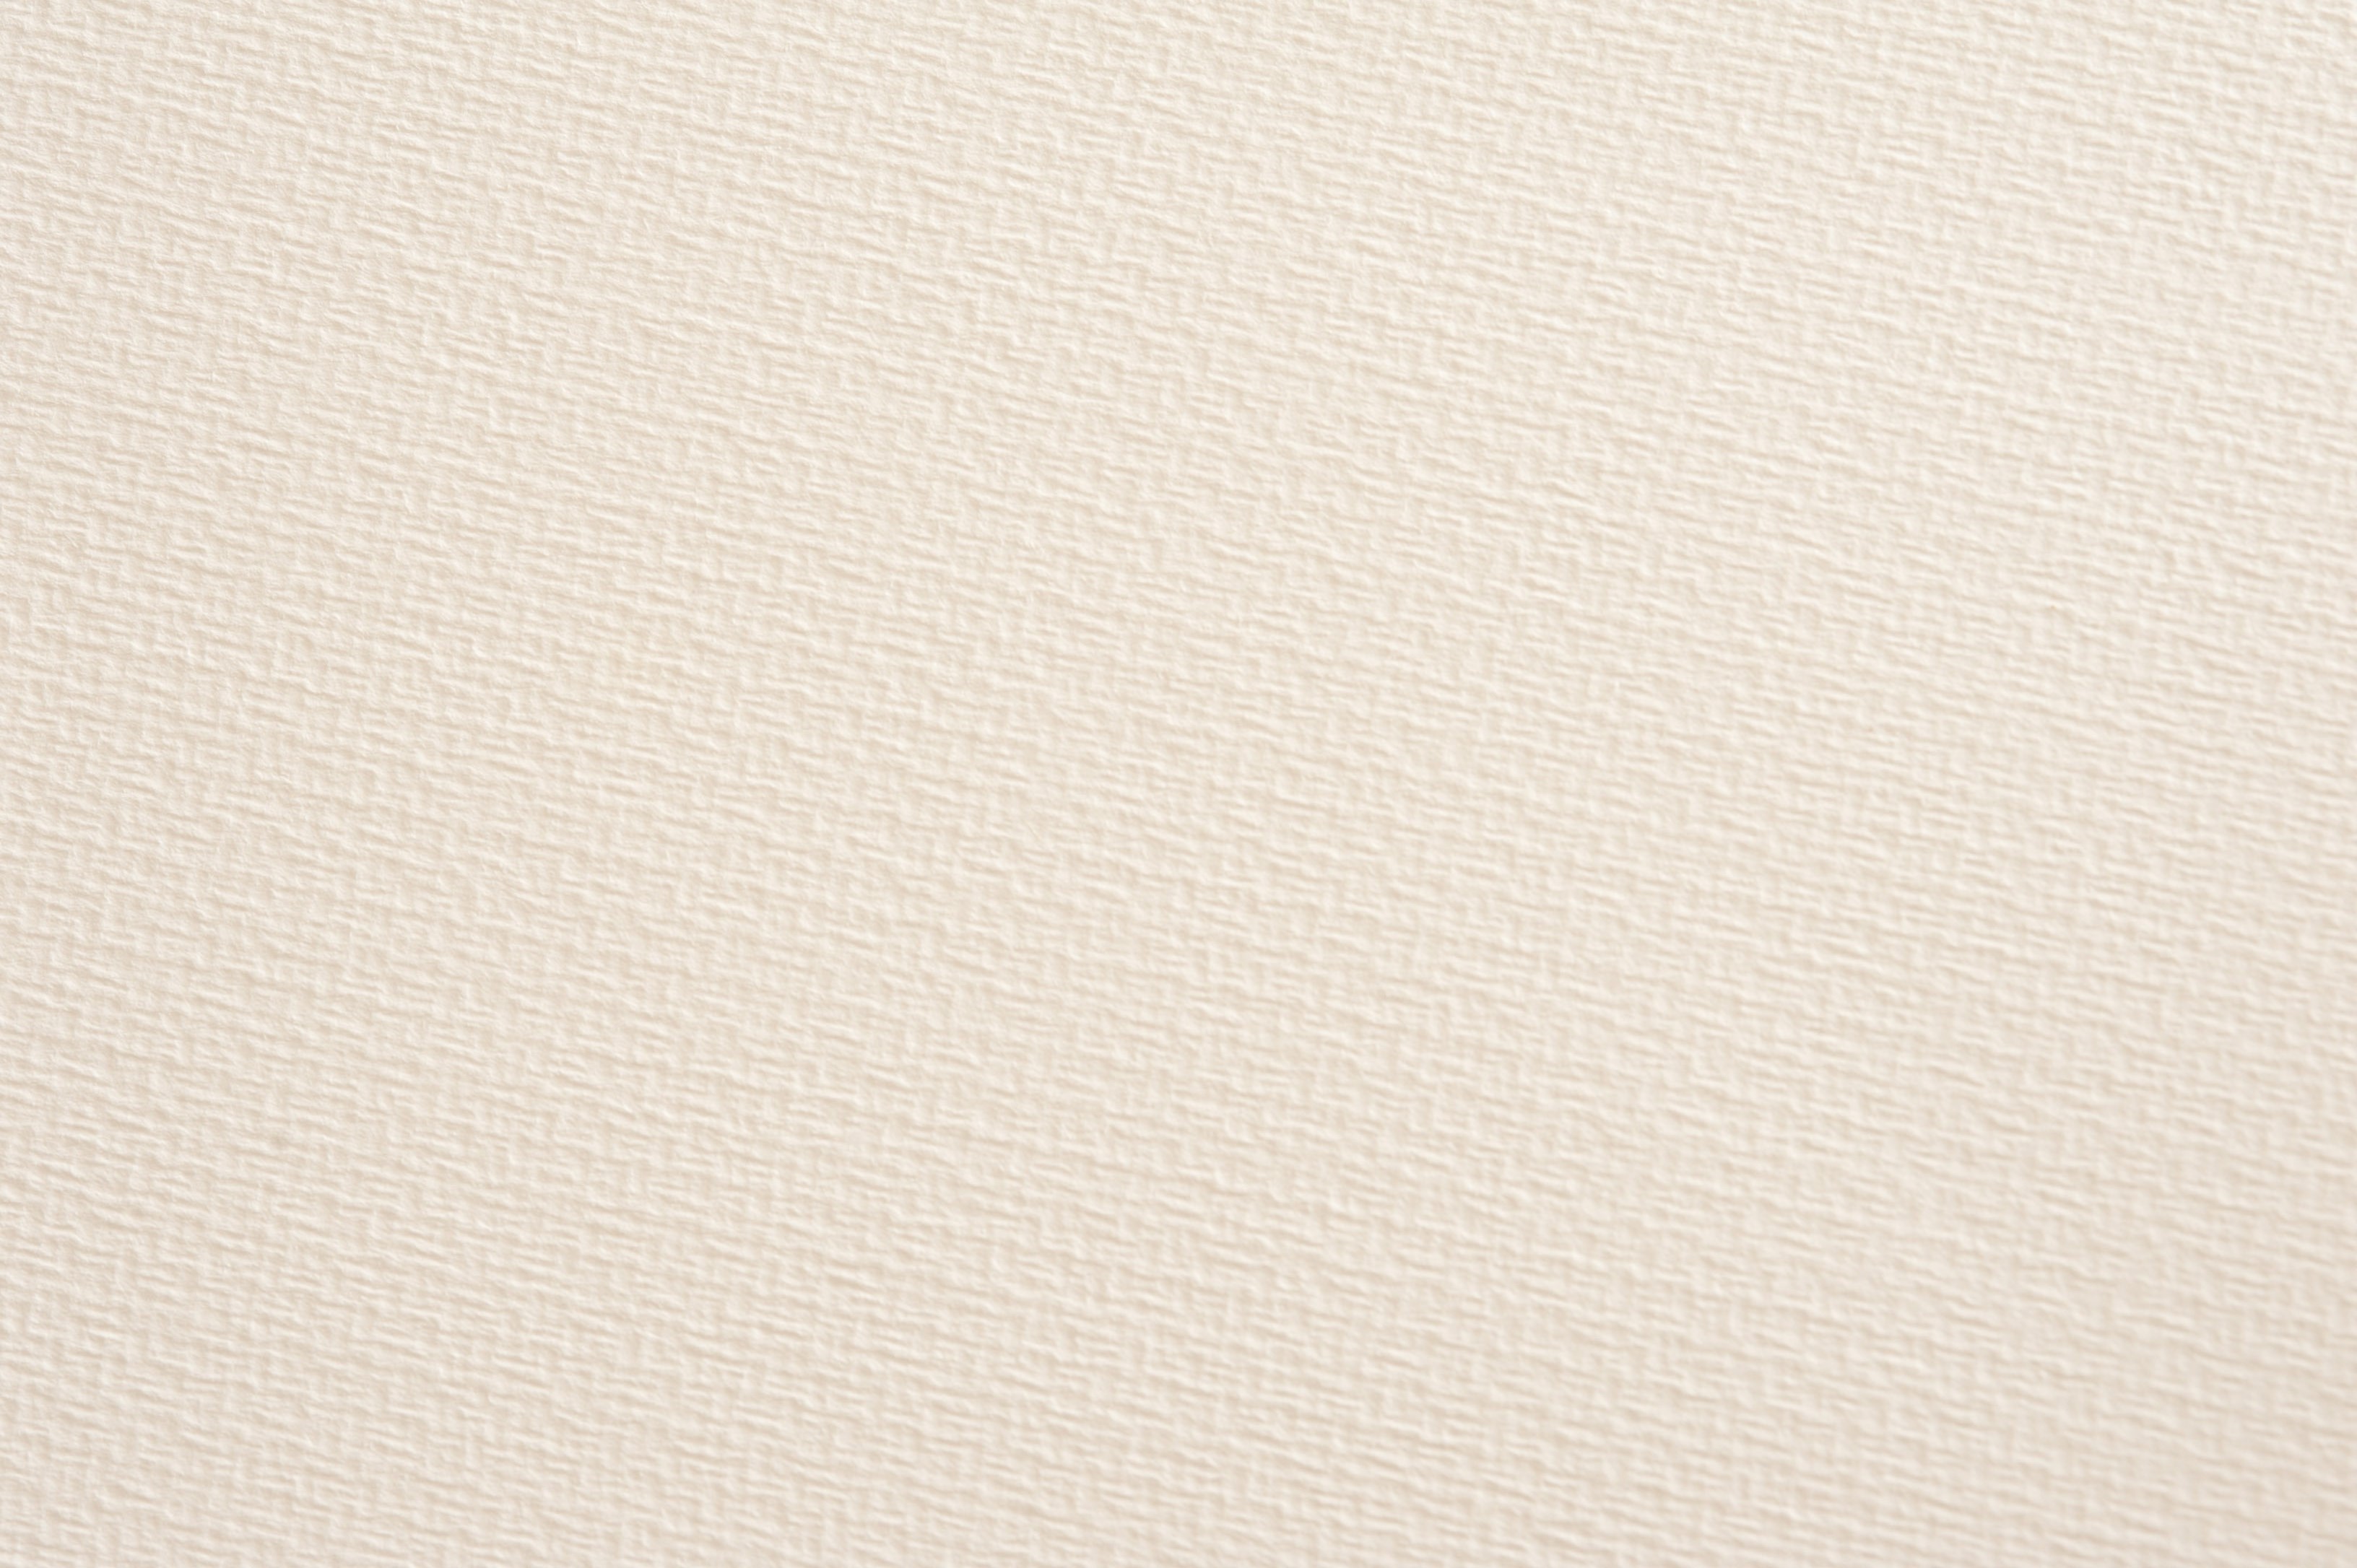 canvas paper | Free backgrounds and textures | Cr103.com